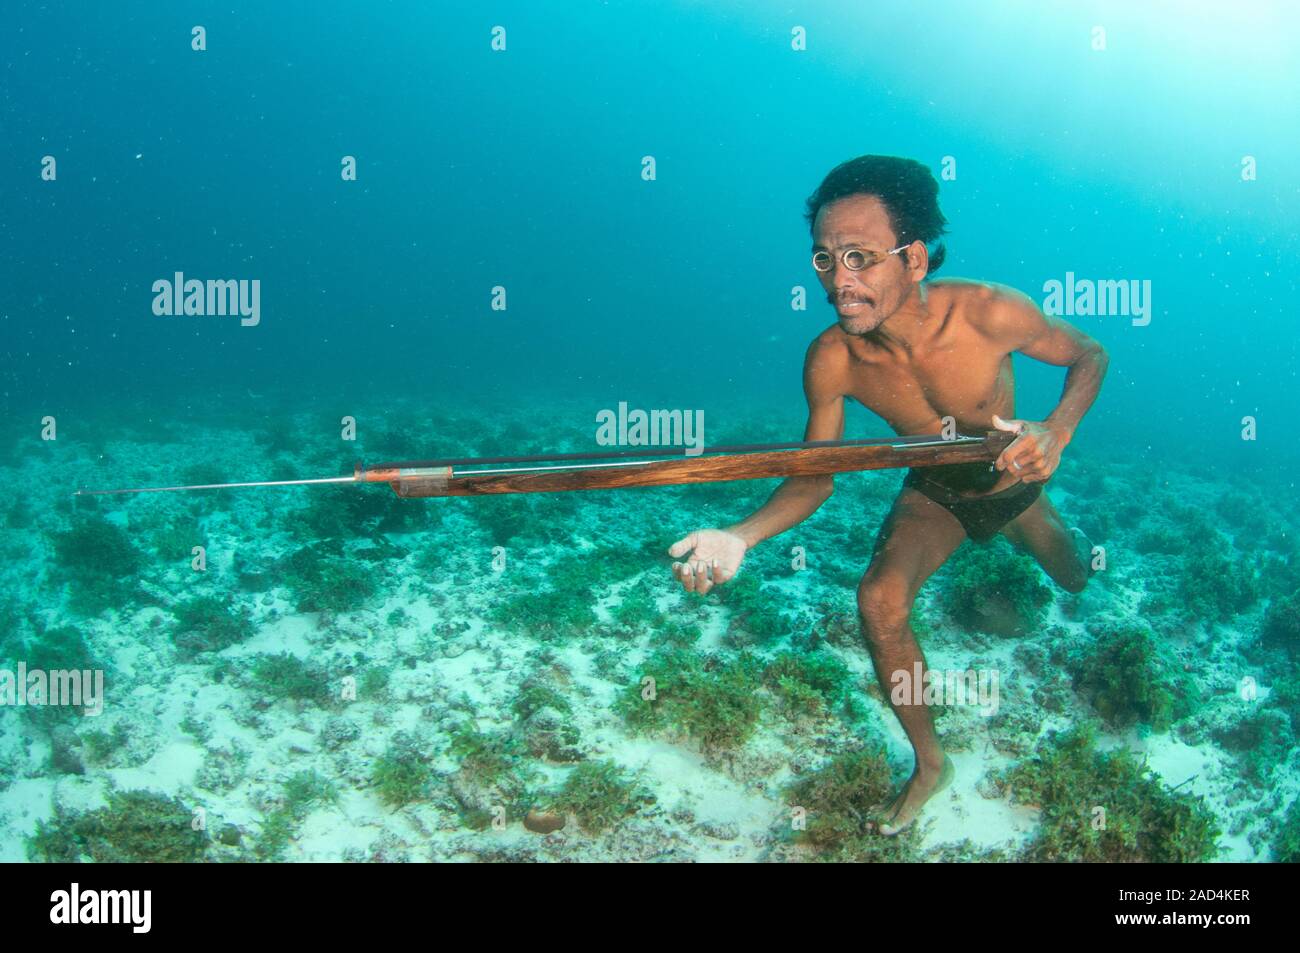 https://c8.alamy.com/comp/2AD4KER/spear-fishing-malaysia-bajau-sea-gypsy-spearfisherman-freediving-and-walking-on-the-seabed-hunting-for-fish-with-a-home-made-speargun-the-bajau-peo-2AD4KER.jpg